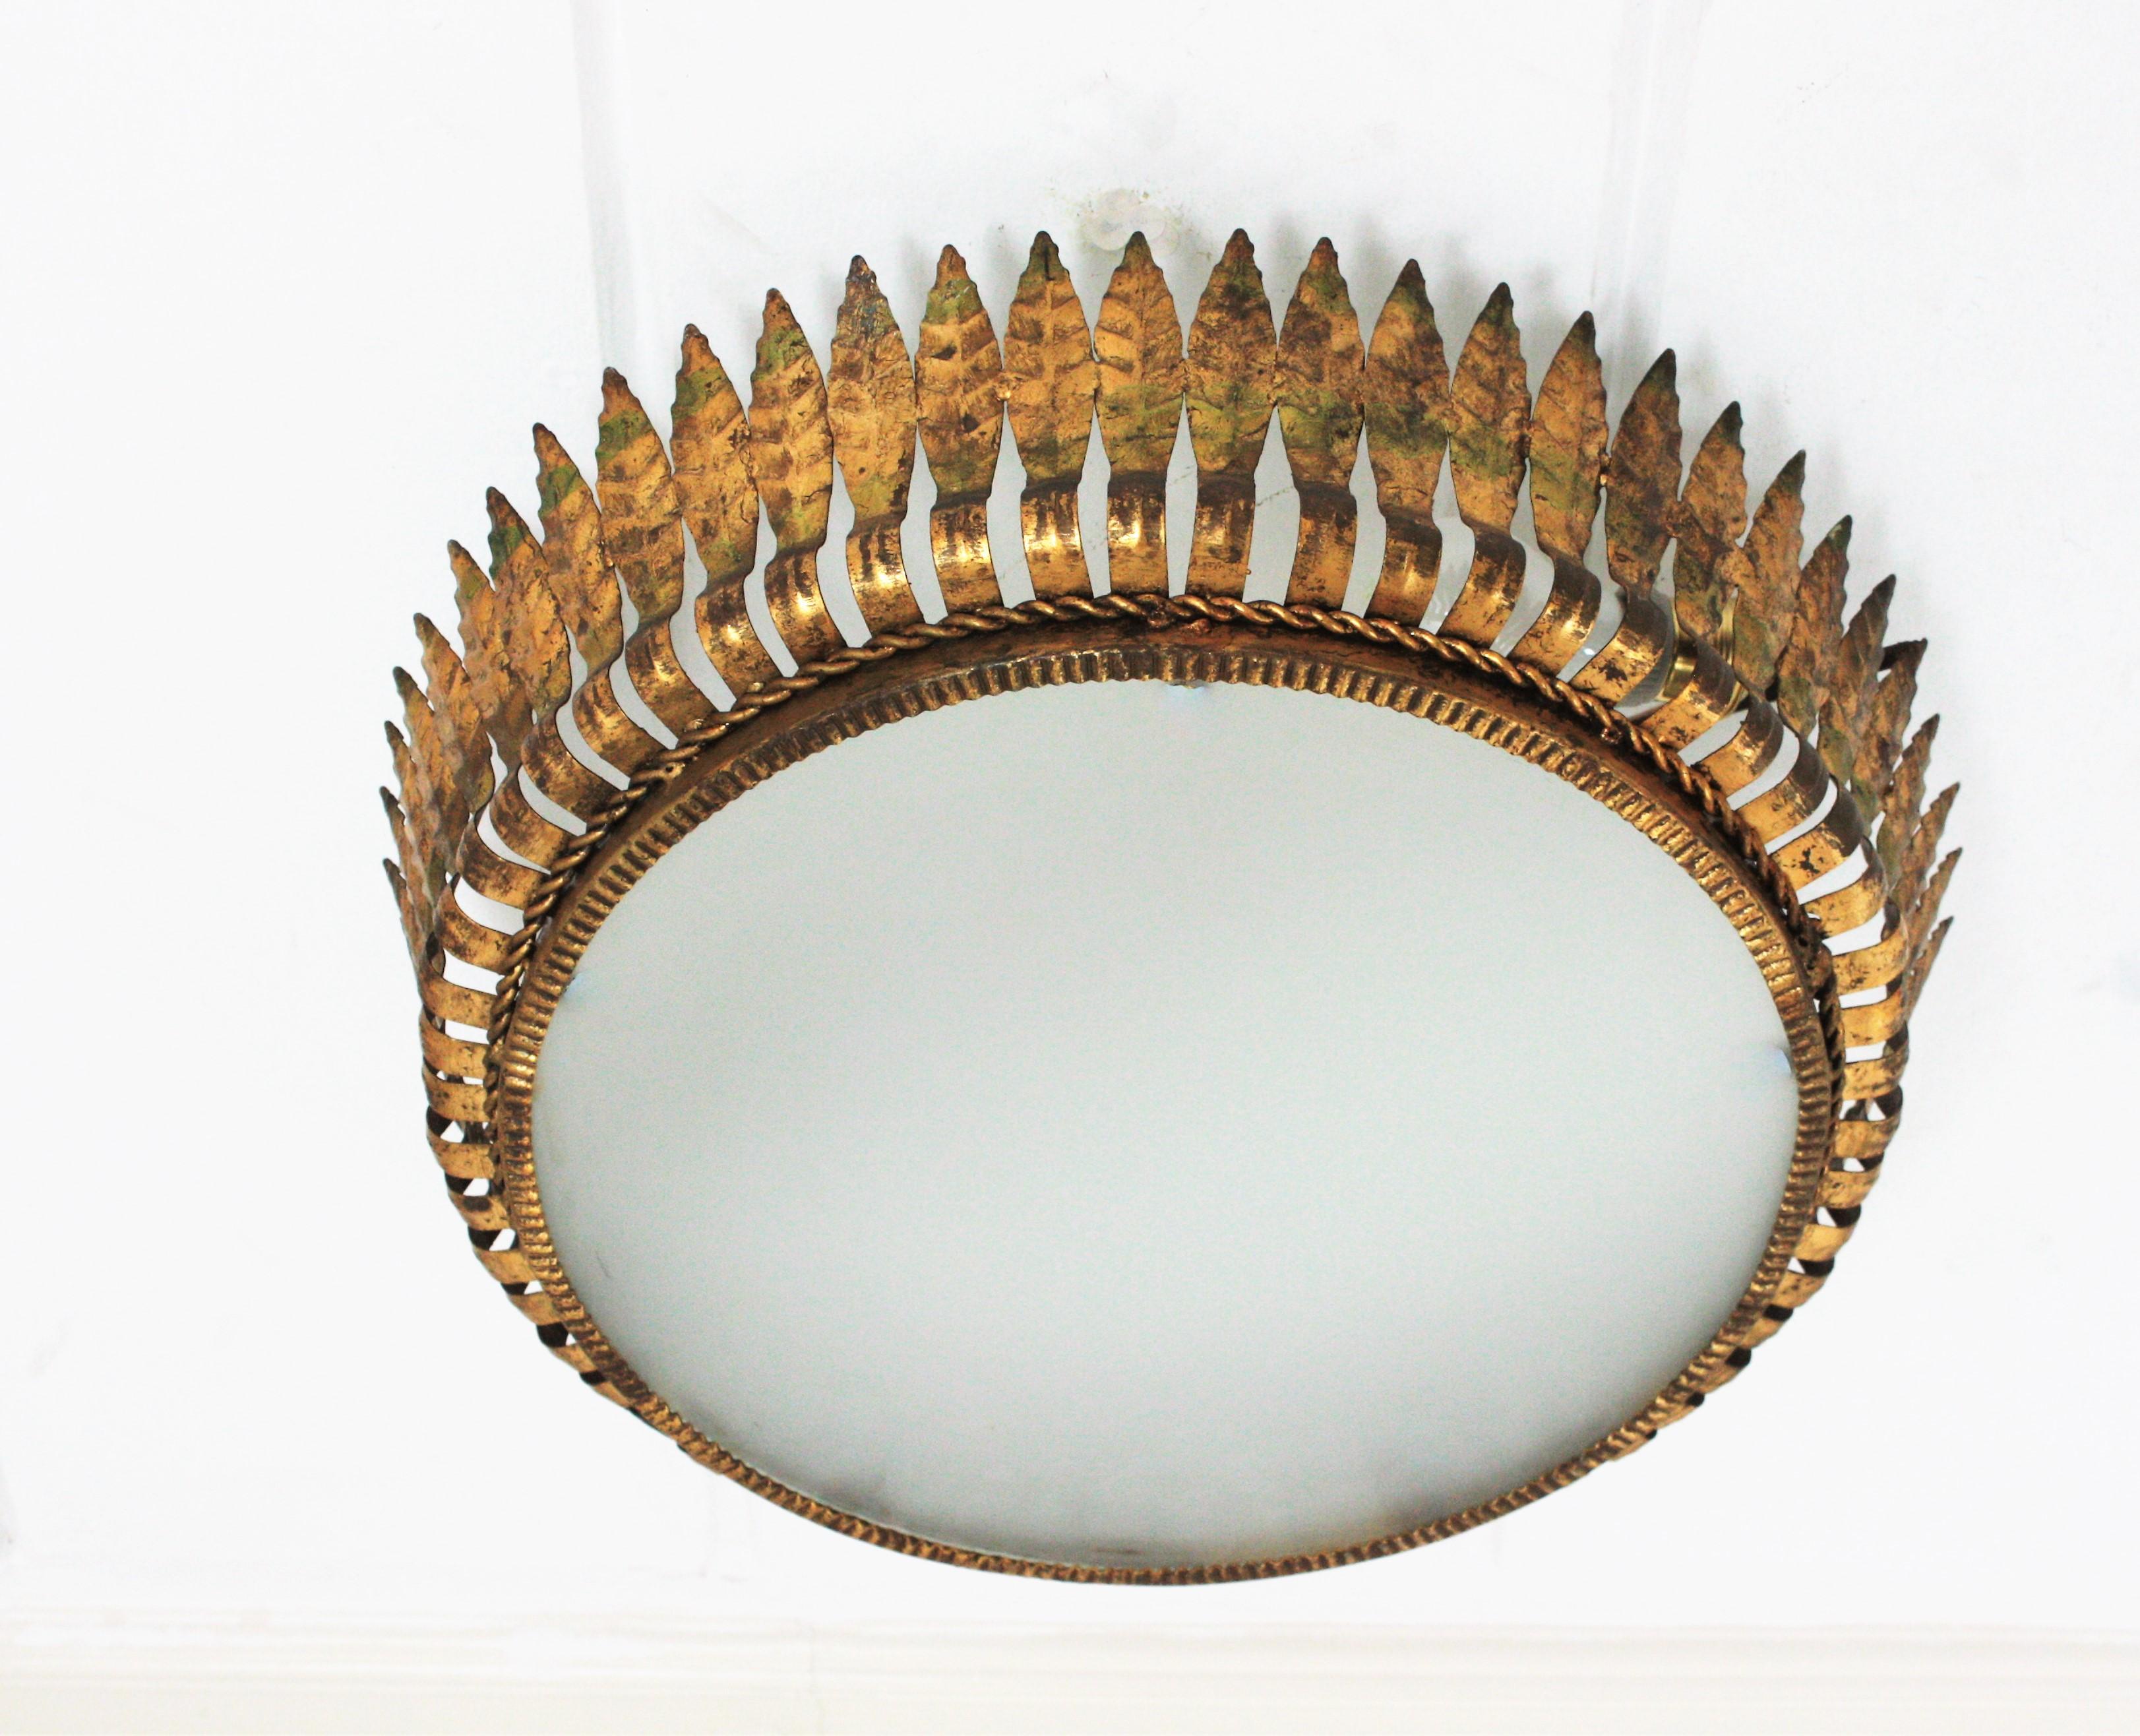 20th Century Large Spanish Crown Sunburst Leafed Light Fixture in Gilt Metal & Frosted Glass For Sale